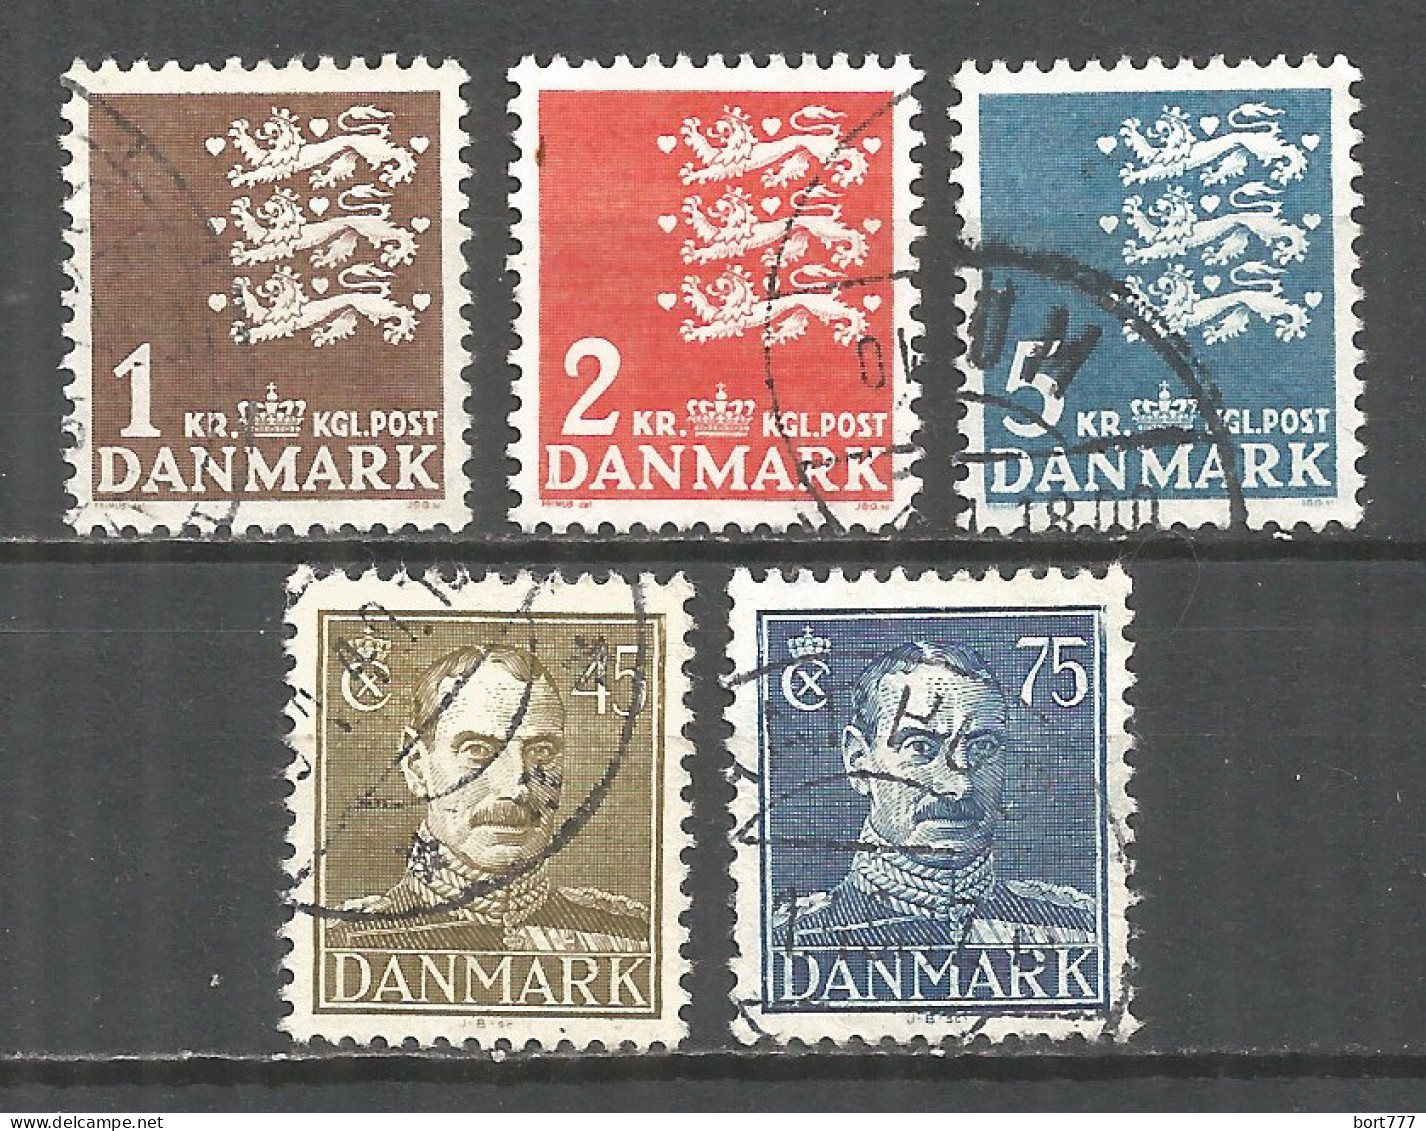 Denmark 1946 Year Used Stamps  - Used Stamps